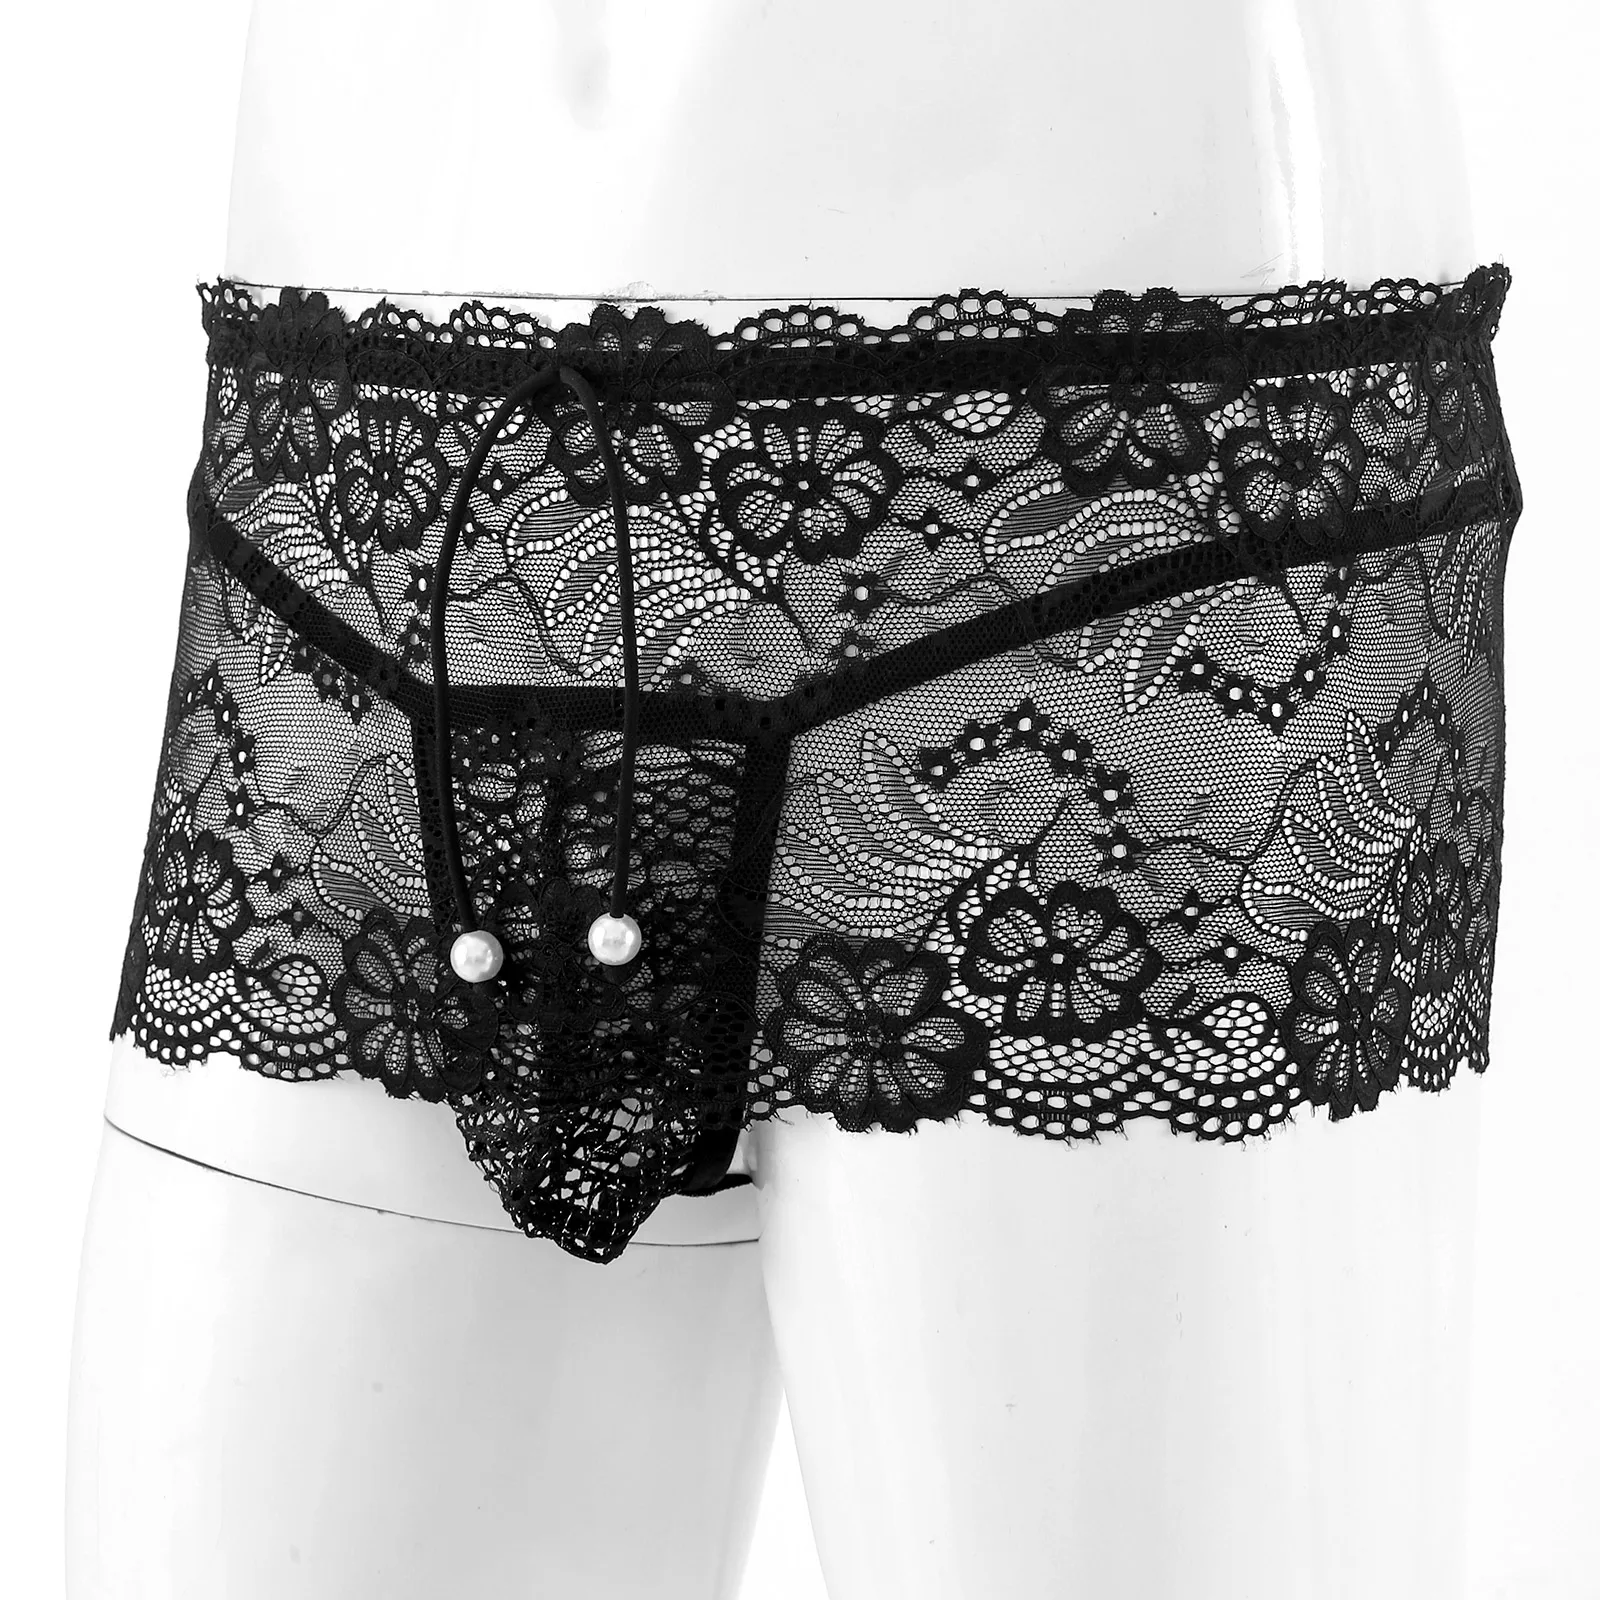 string thongs Men's Panties Erotic Sexy Lingerie Low Waist Sissy Male Gay Underwear See-through Lace Mini Skirt with Bulge Pouch G-strings most comfortable mens underwear